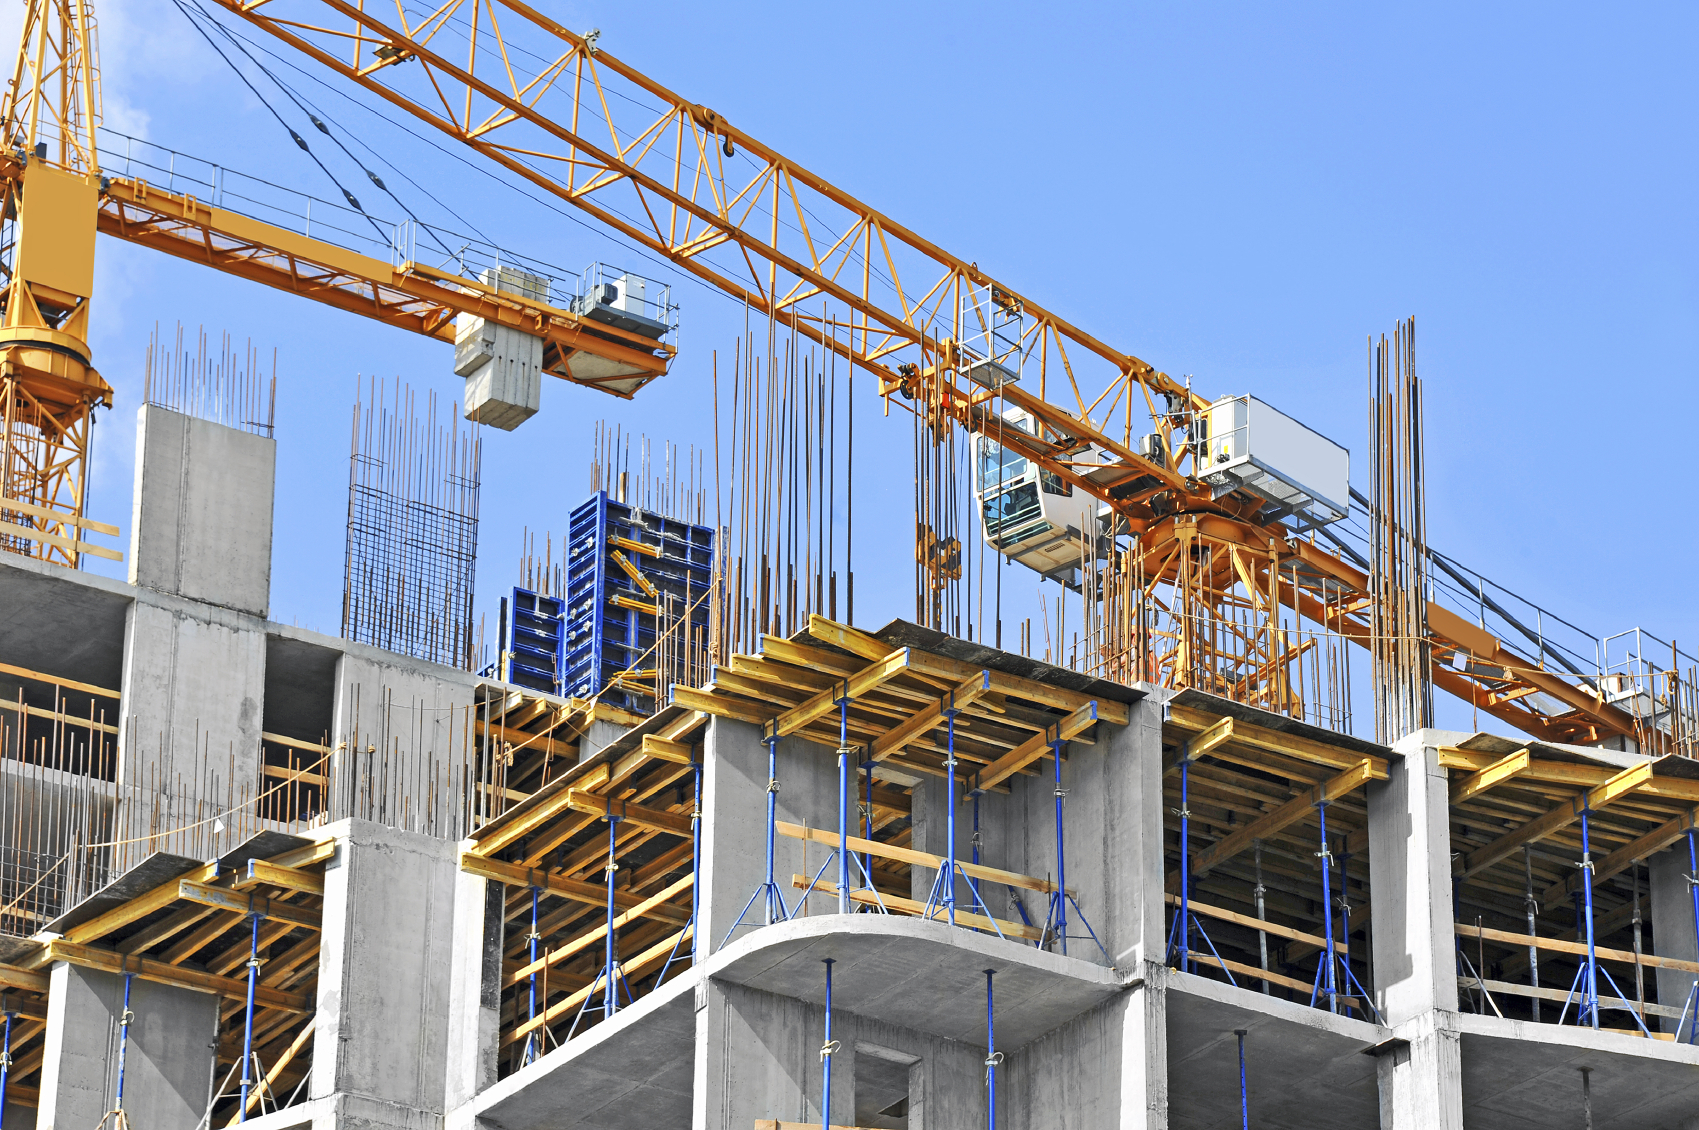 Chinese dominance over Kenya's construction industry